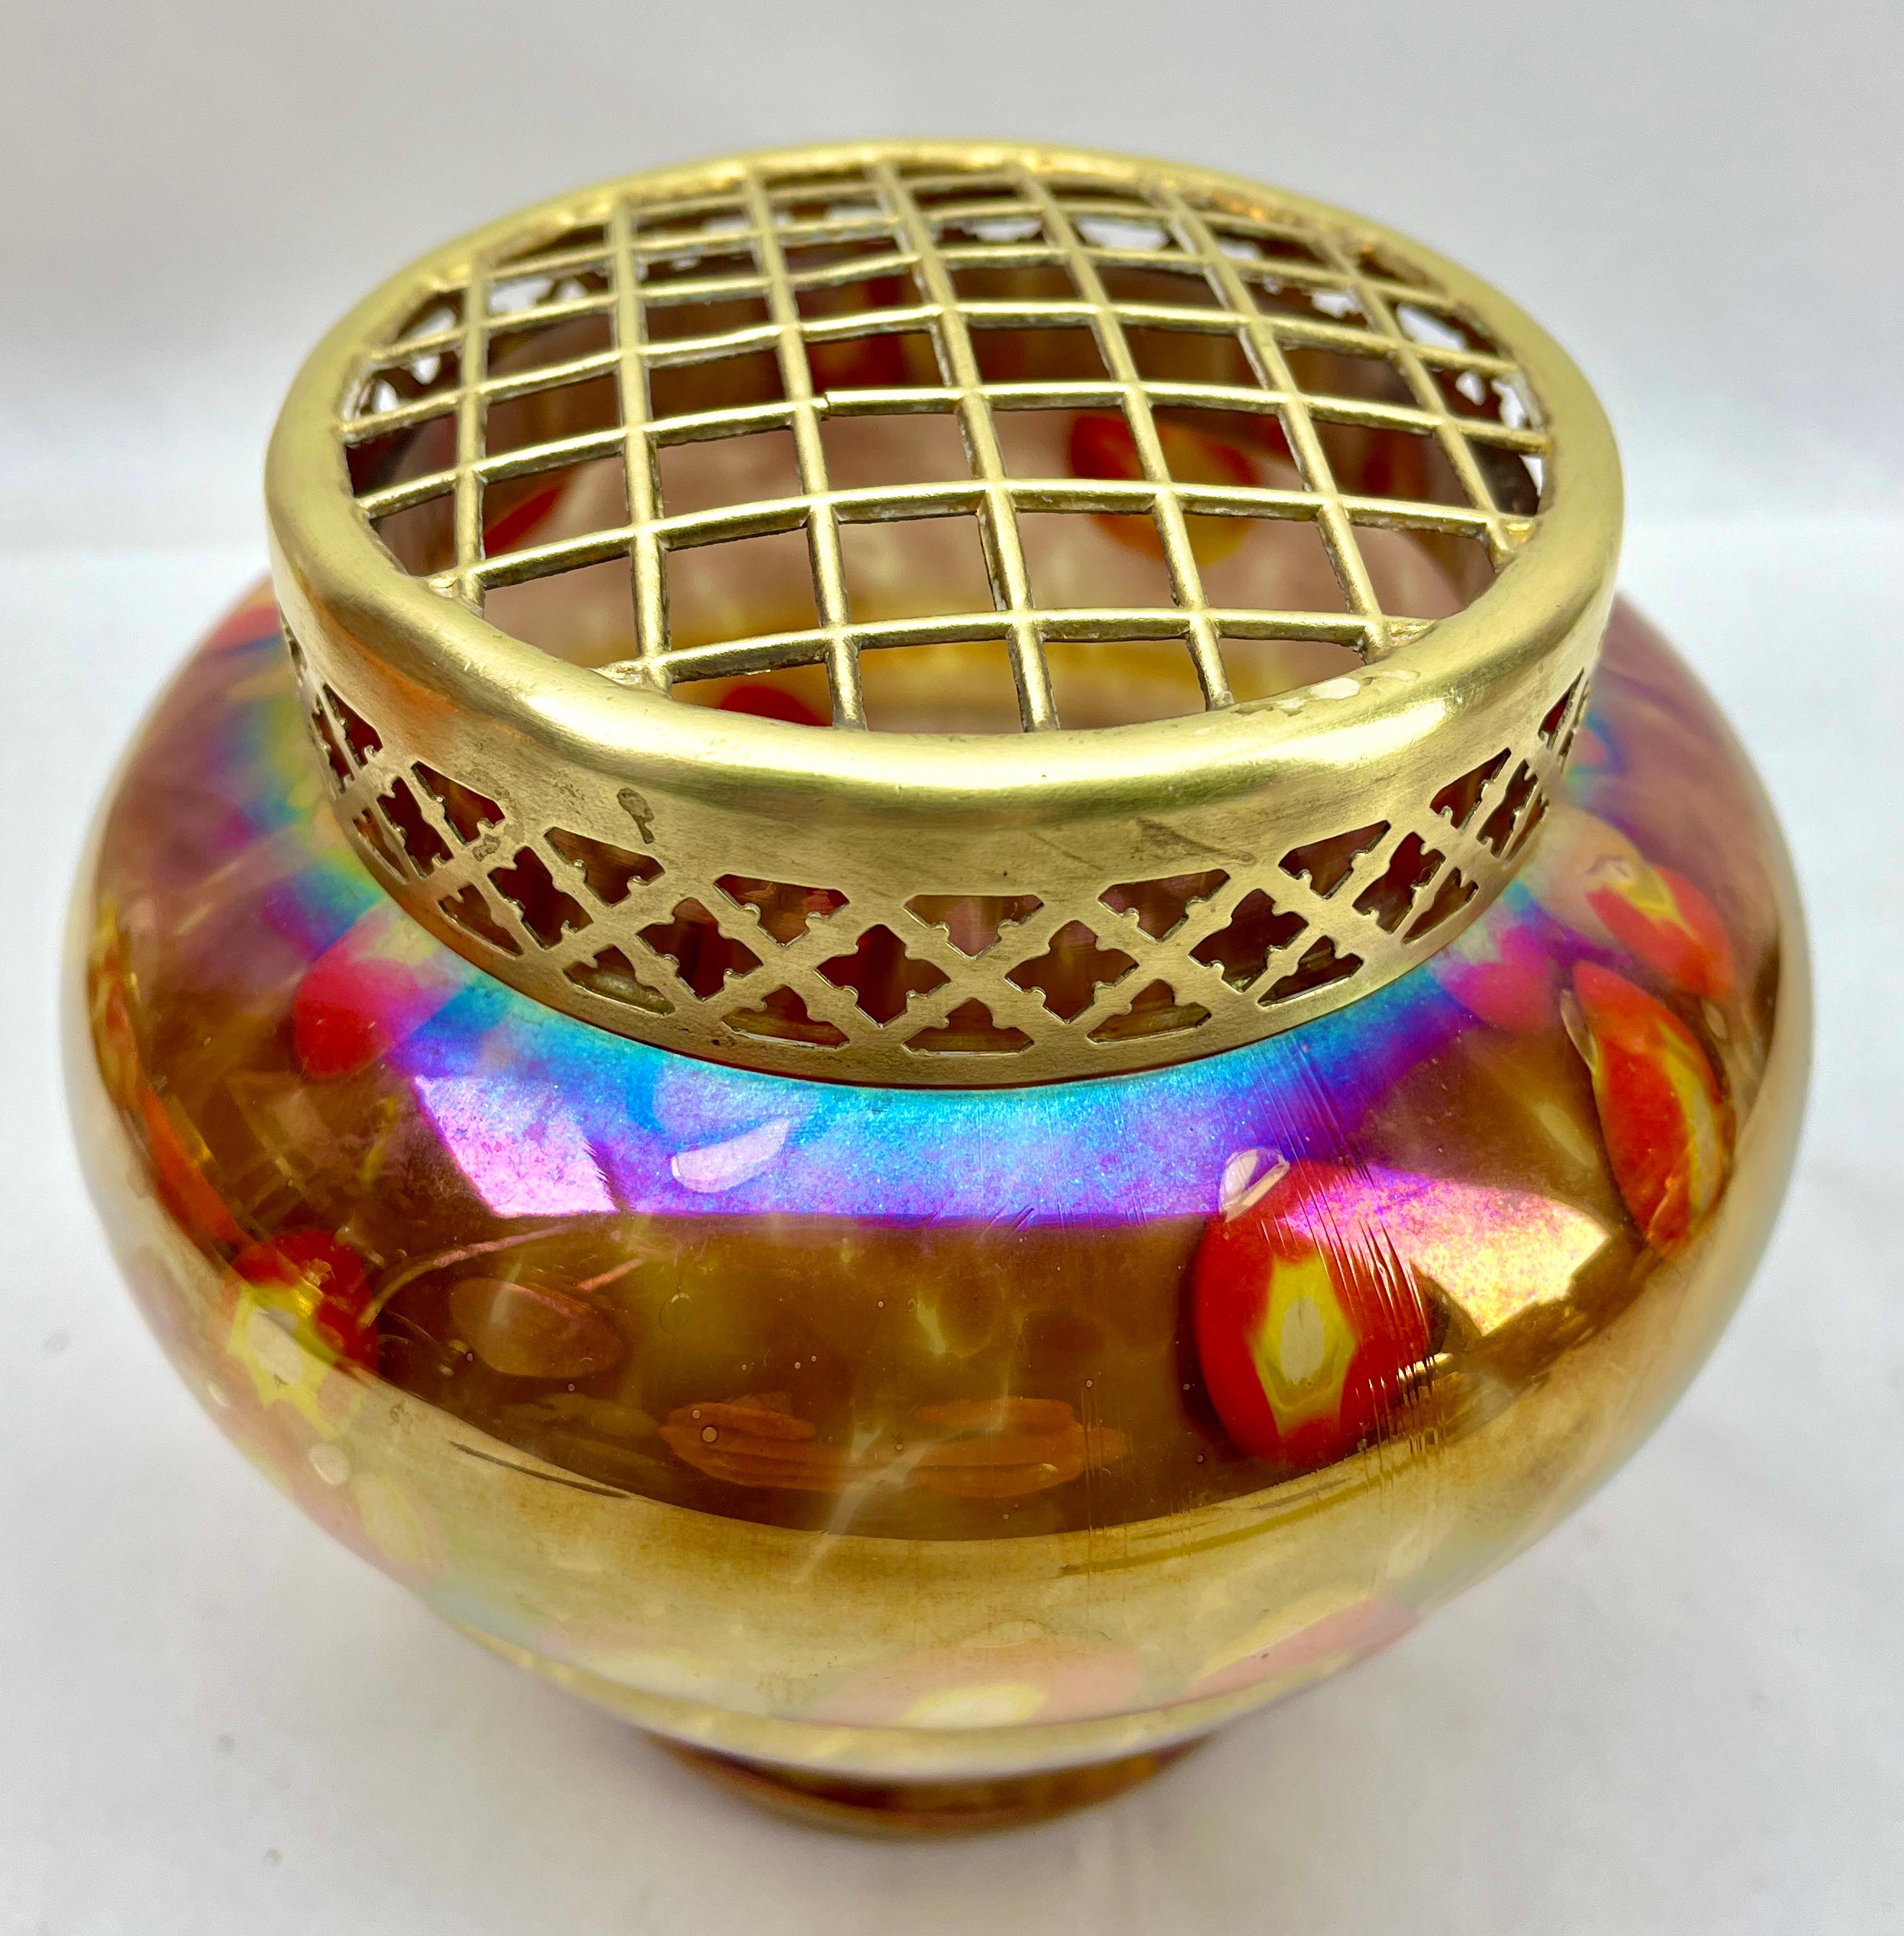 'Pique Fleurs' Iridescent Glass Vase, in Multi Color Decor with Grille, 1930s  For Sale 1